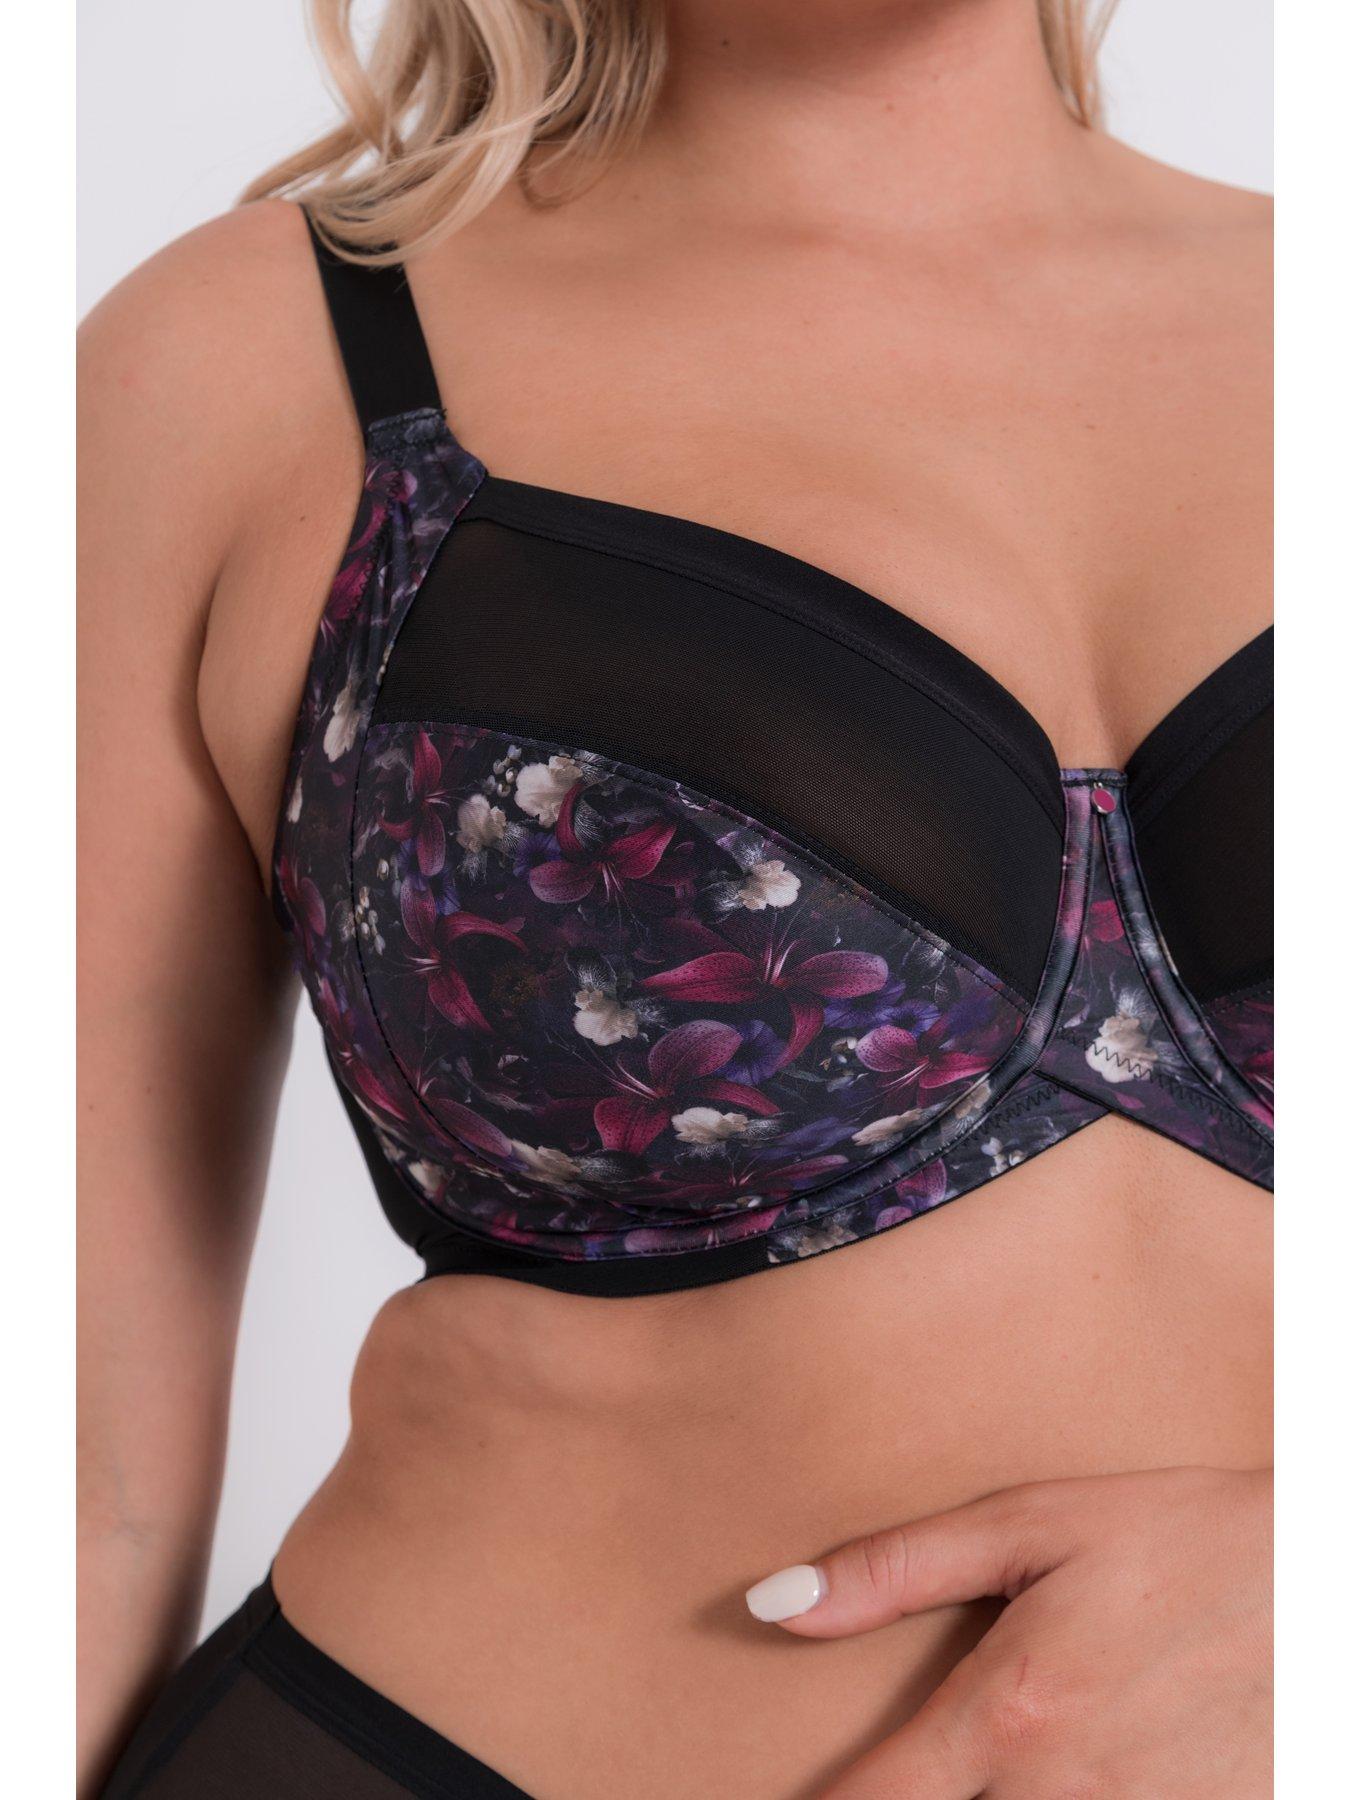 Scantilly Authority Balcony Bra in Black - Busted Bra Shop